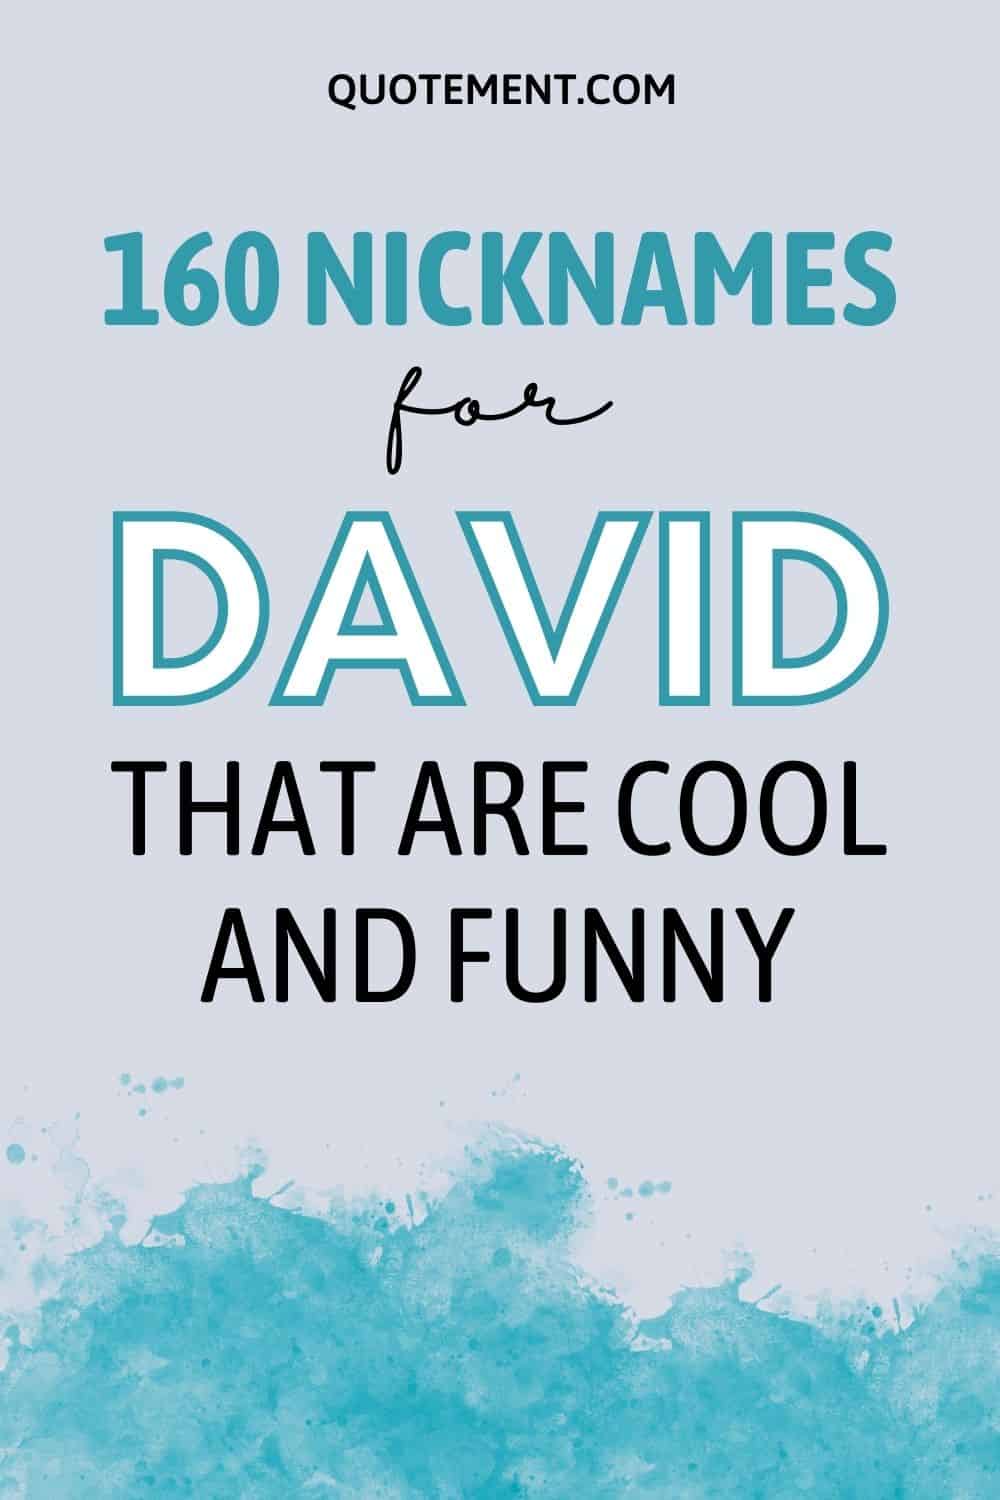 160 Nicknames For David Amazing Collection Of Names